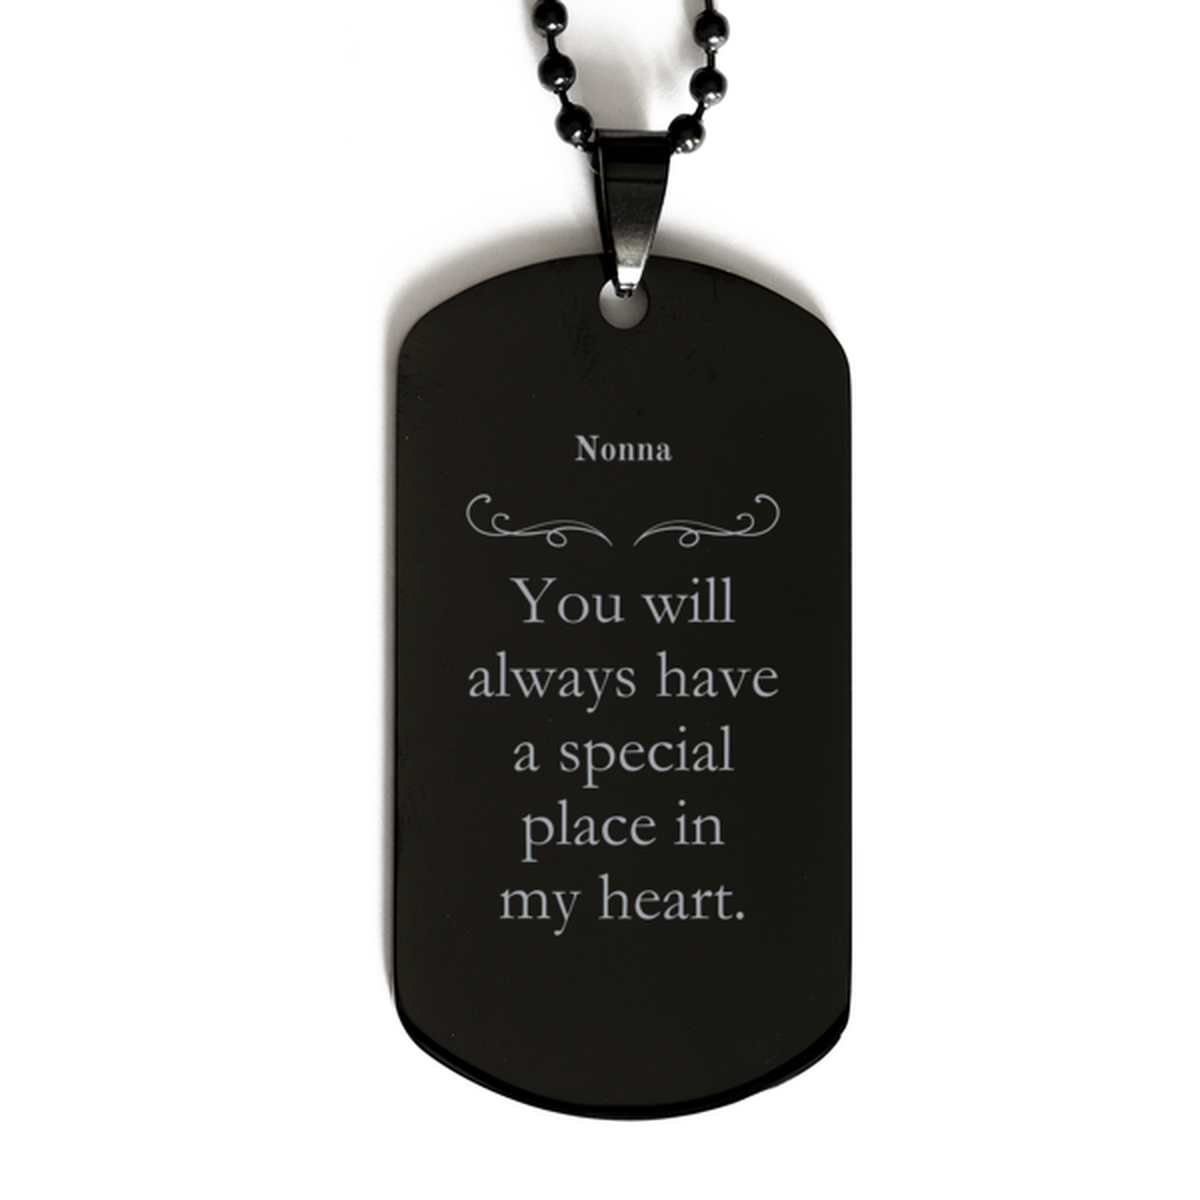 Nonna Engraved Black Dog Tag - Special Place in My Heart Veterans Day Gift